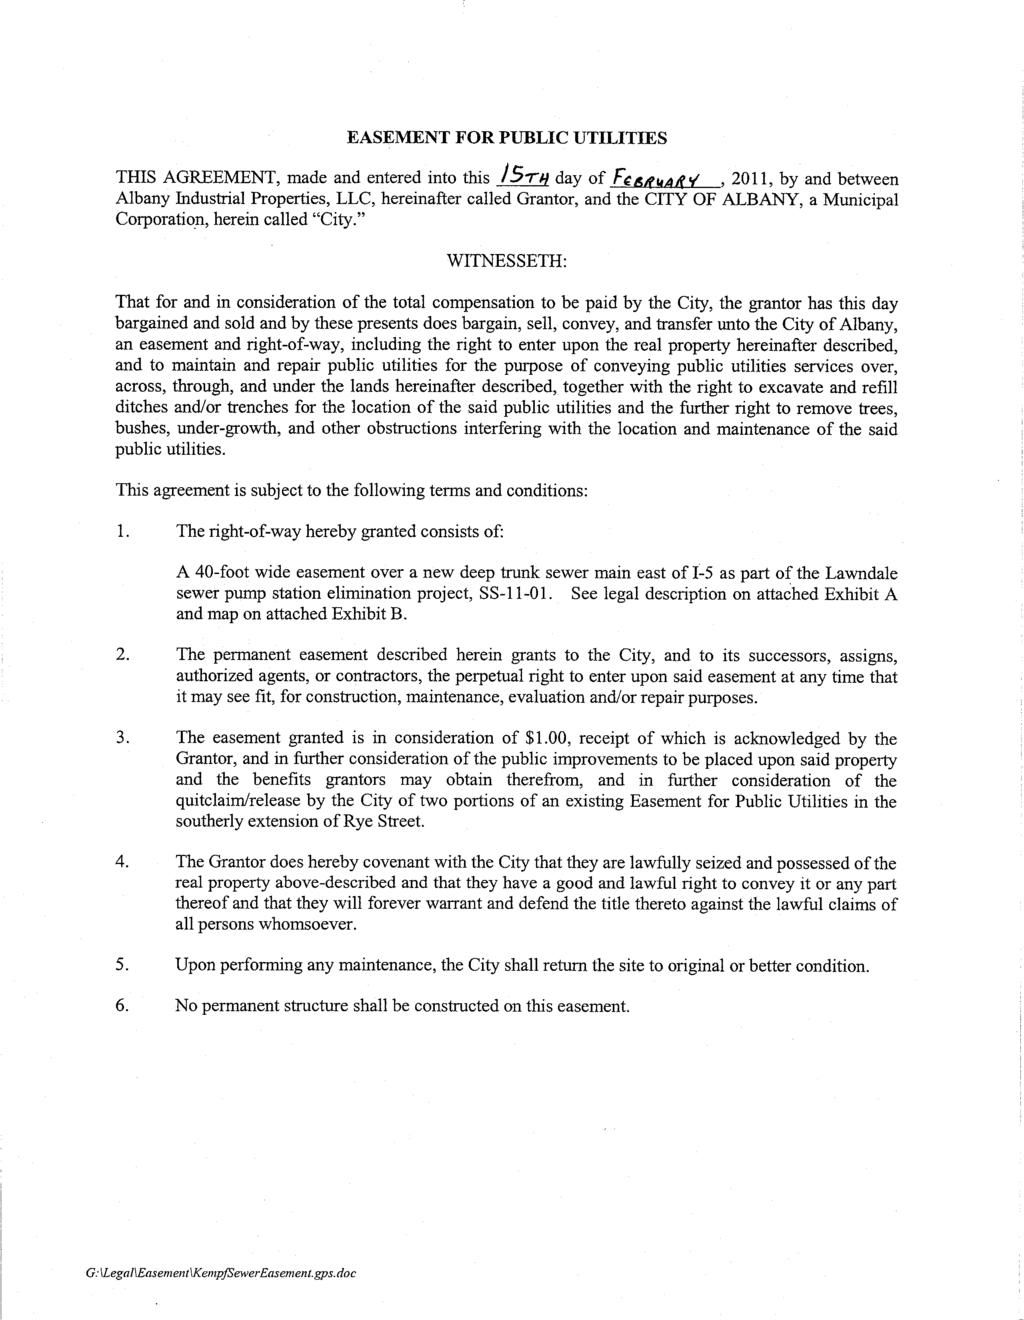 EASEMENT FOR PUBLIC UTILITIES THIS AGREEMENT, made and entered into this ISTy day of FFMwM y, 2011, by and between Albany Industrial Properties, LLC, hereinafter called Grantor, and the CITY OF